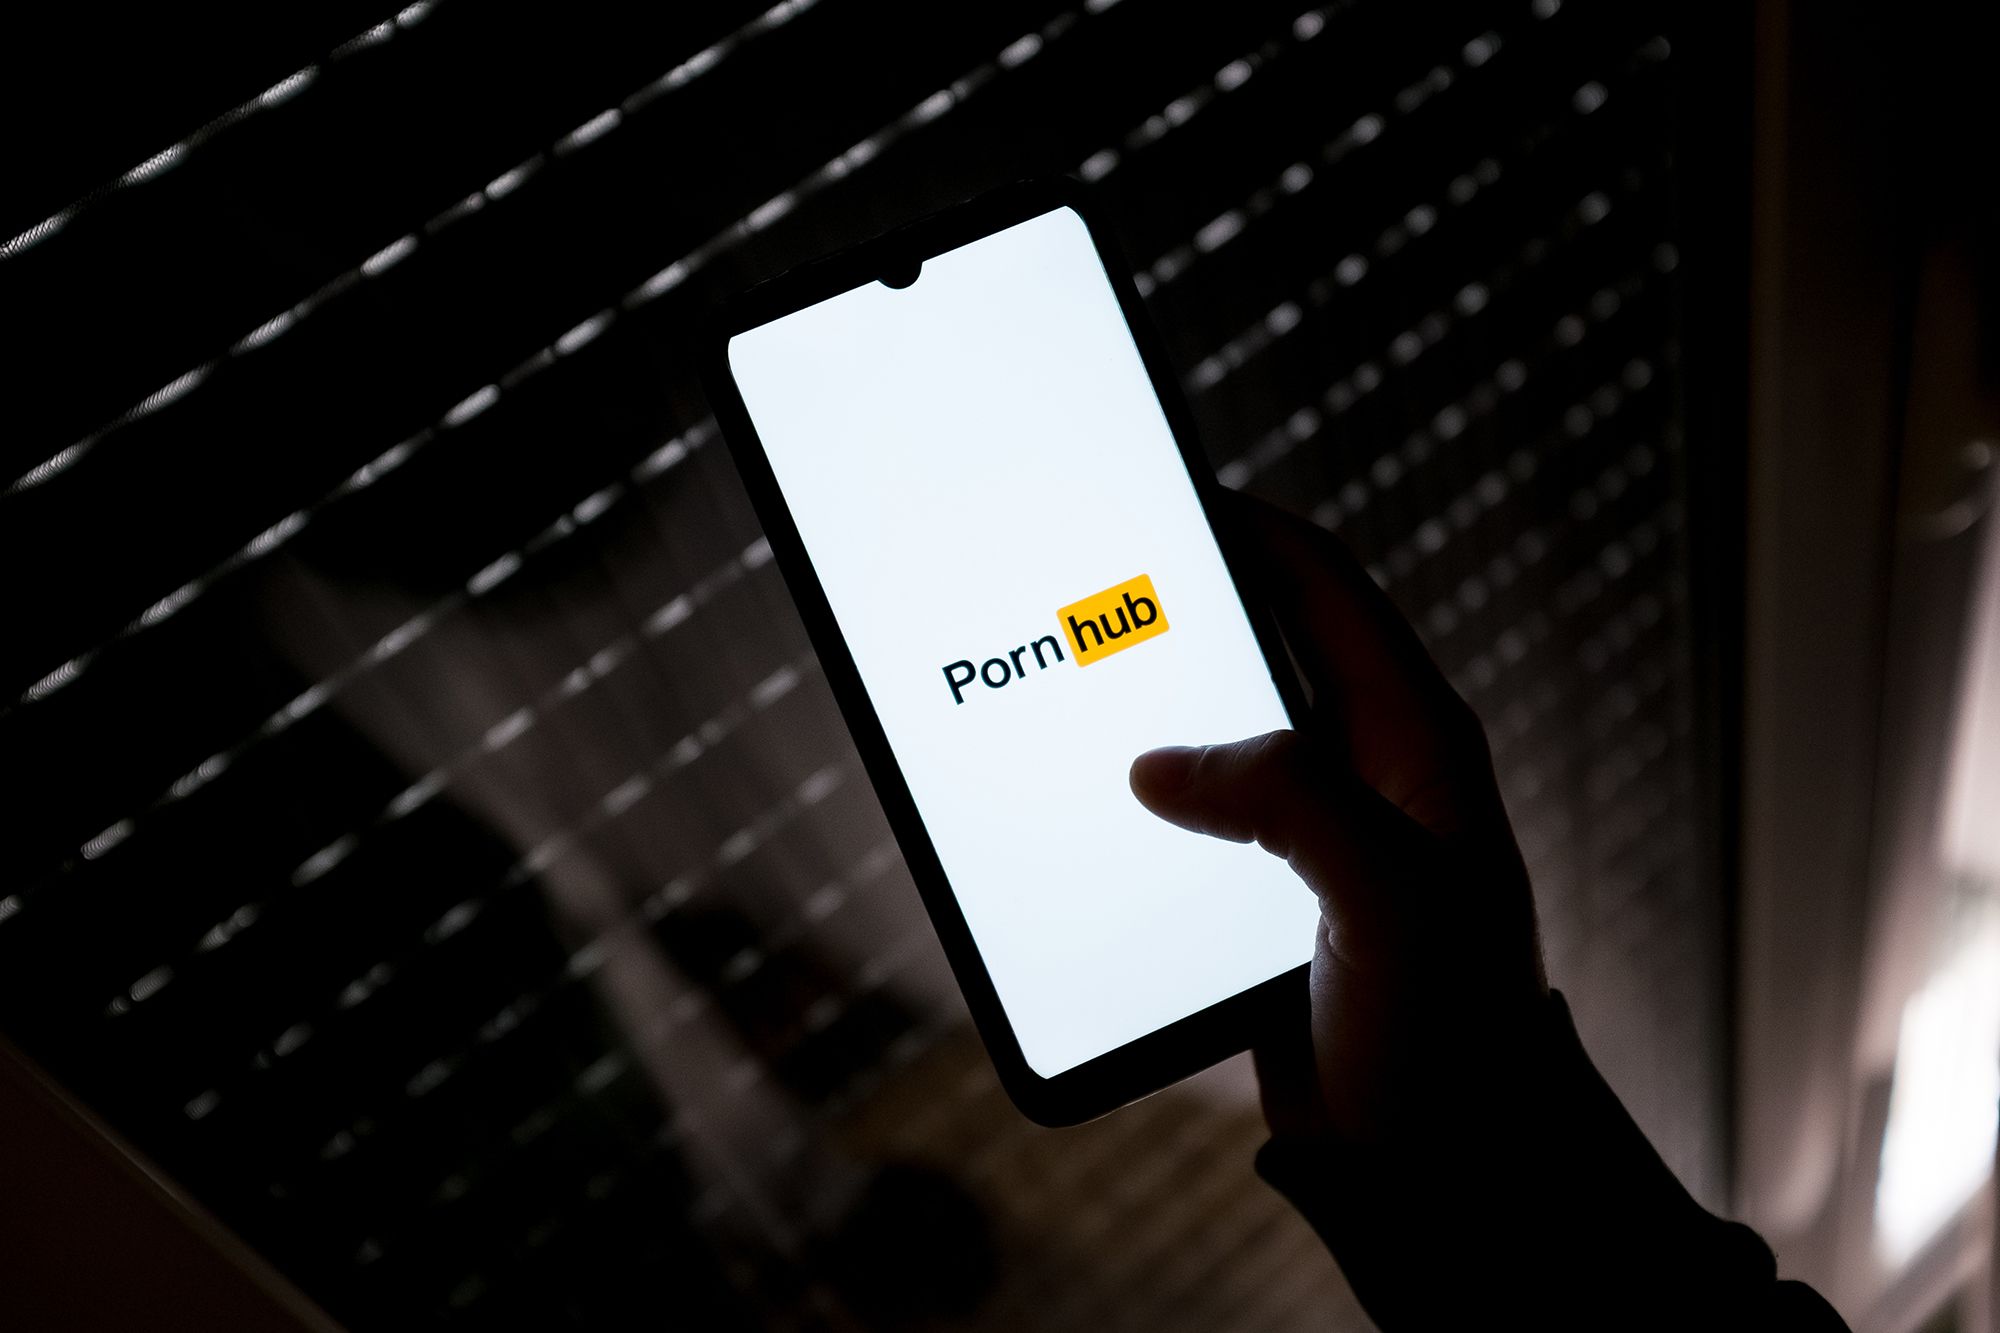 Www Porncub Com - First on CNN: Pornhub asks users and Big Tech for help as states adopt age  verification laws | CNN Business